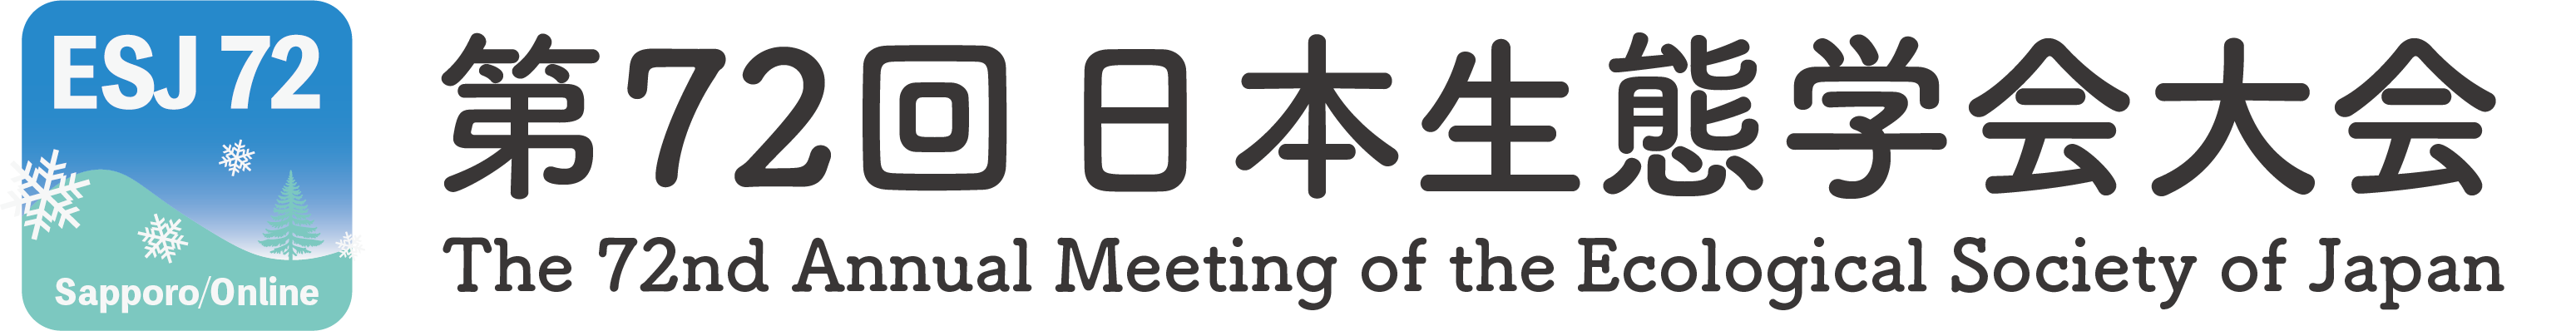 The 72nd Annual Meeting of the Ecological Society of Japan